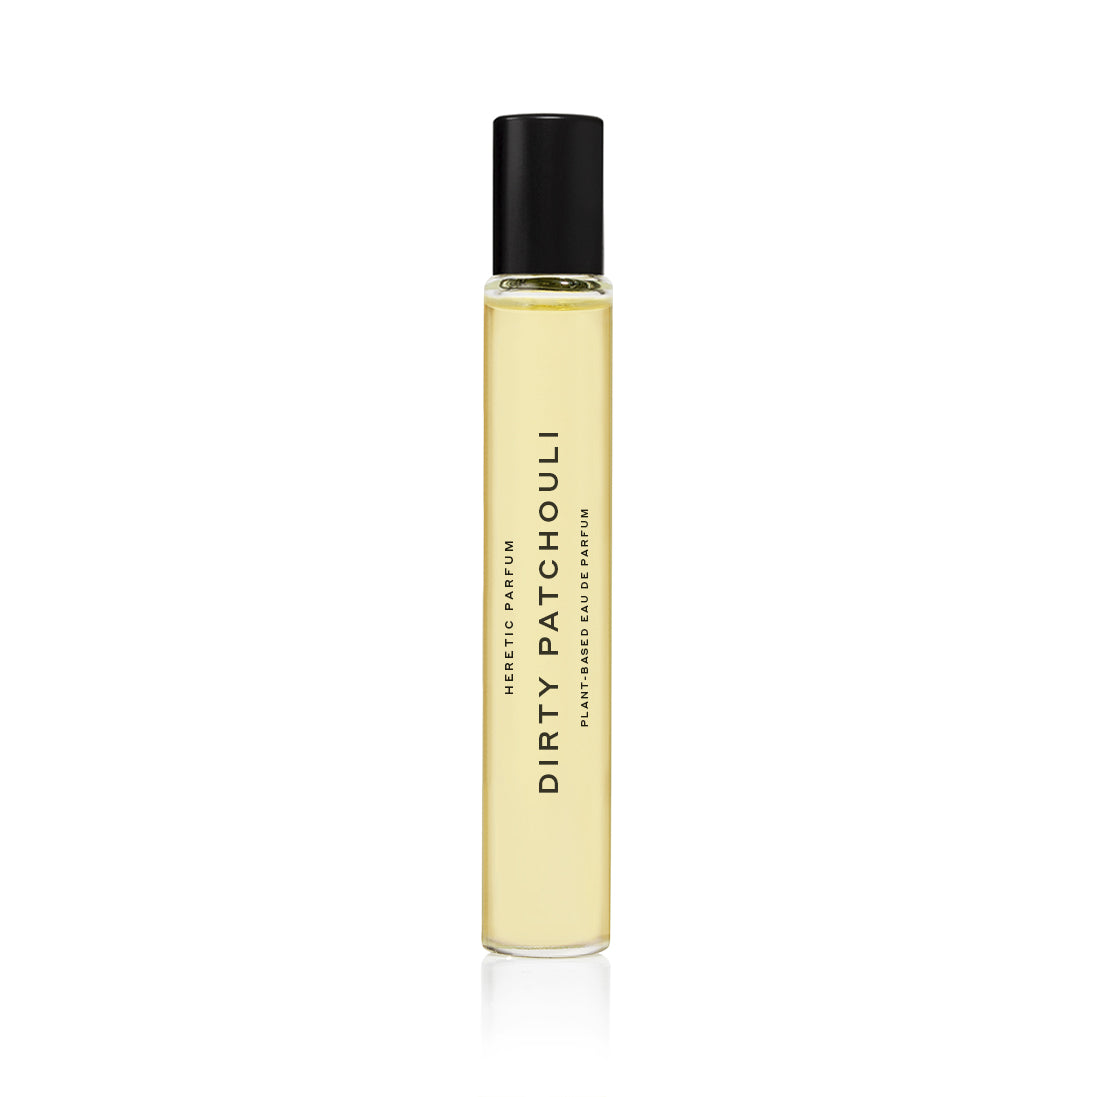 DIRTY PATCHOULI ROLLERBALL